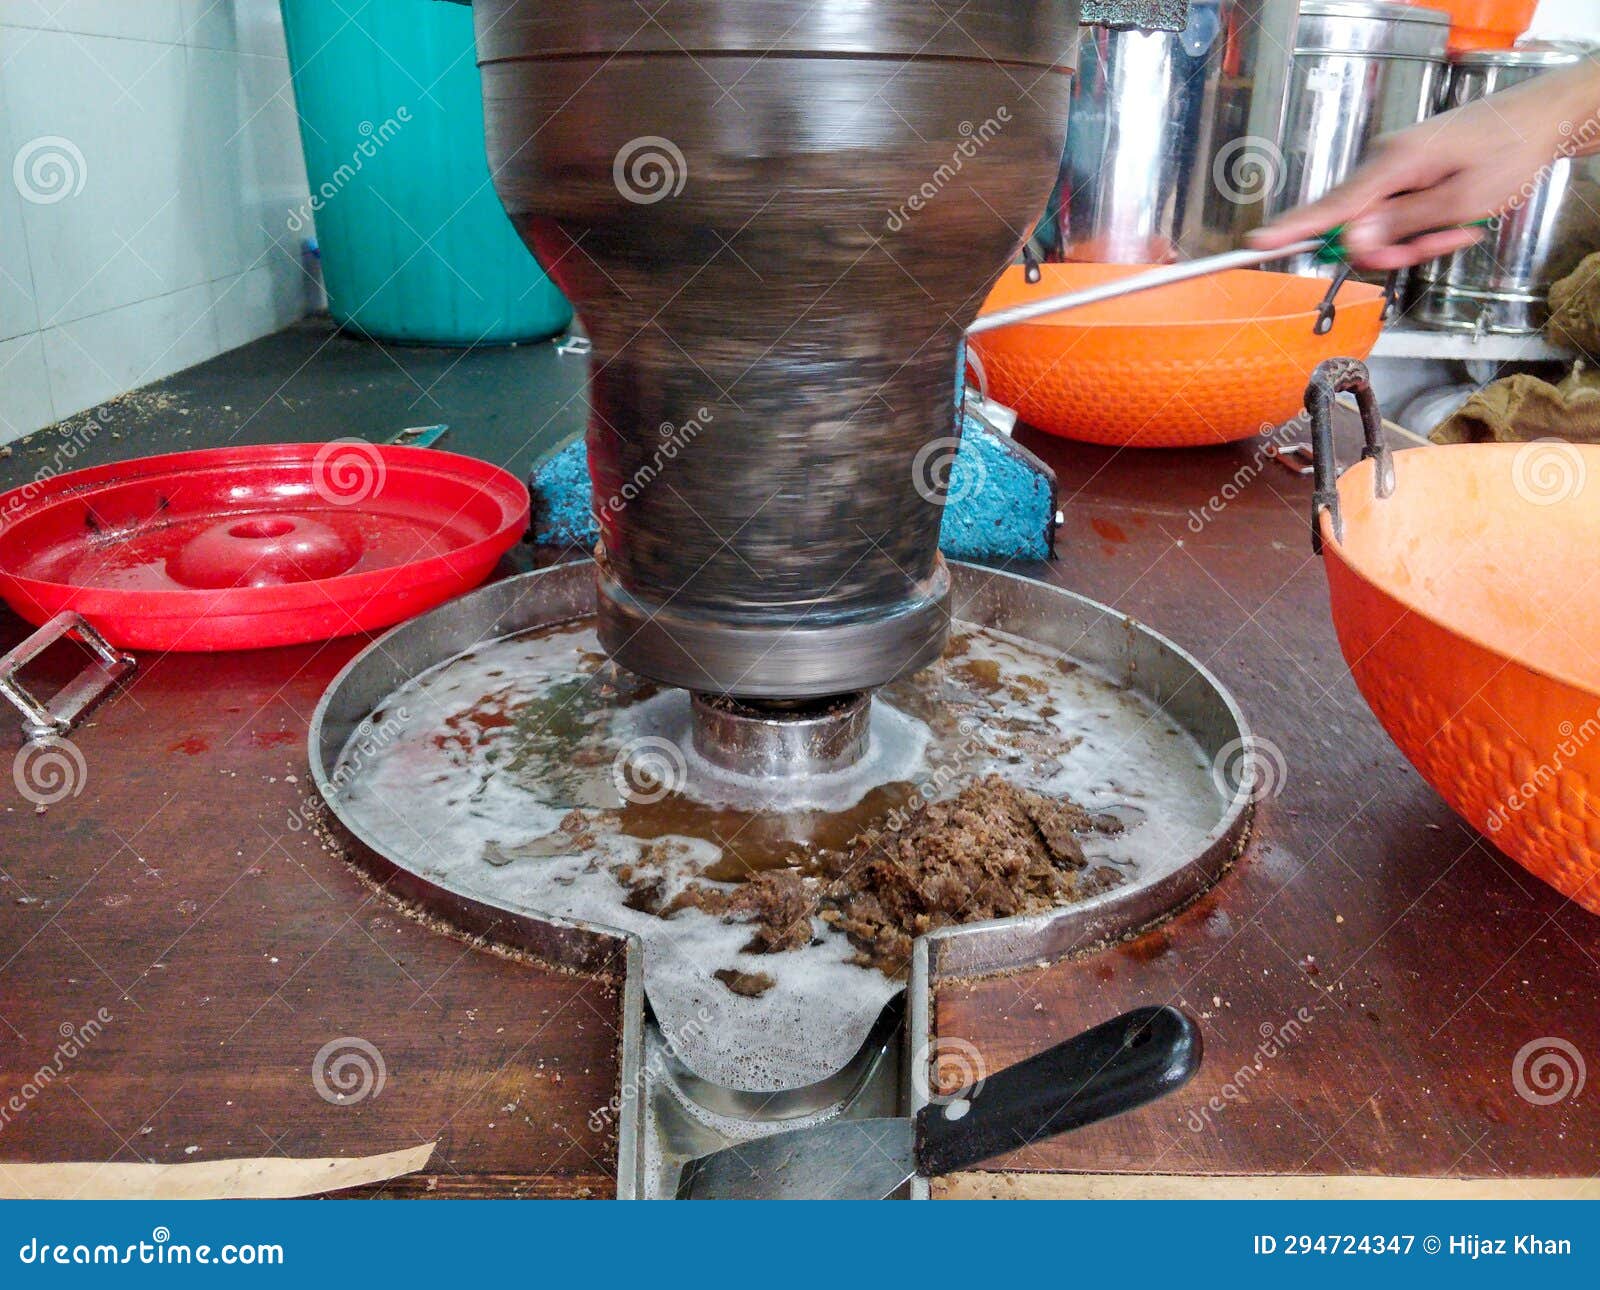 A Coconut Oil Extracting Machine Working and Oil Coming Out Stock Image ...